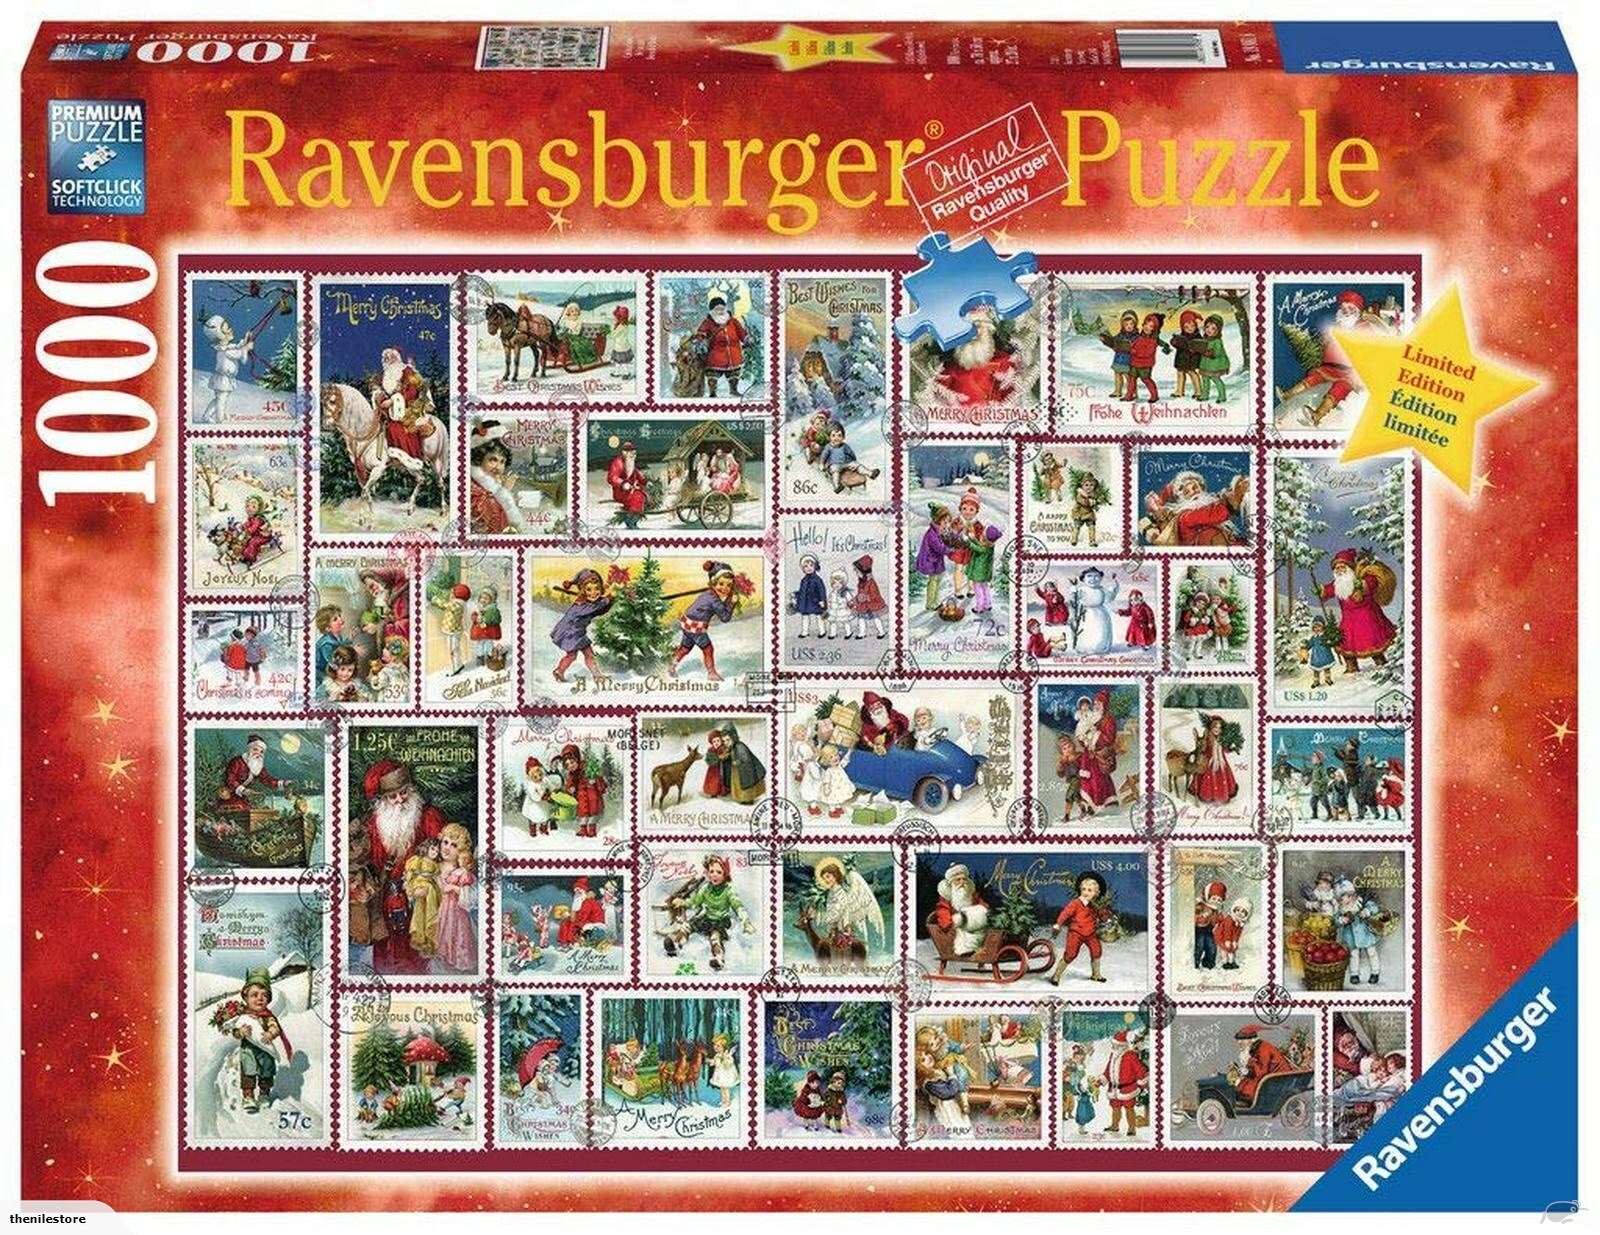 Ravensburger Puzzle 1000pc Limited Edition Christmas Wishes